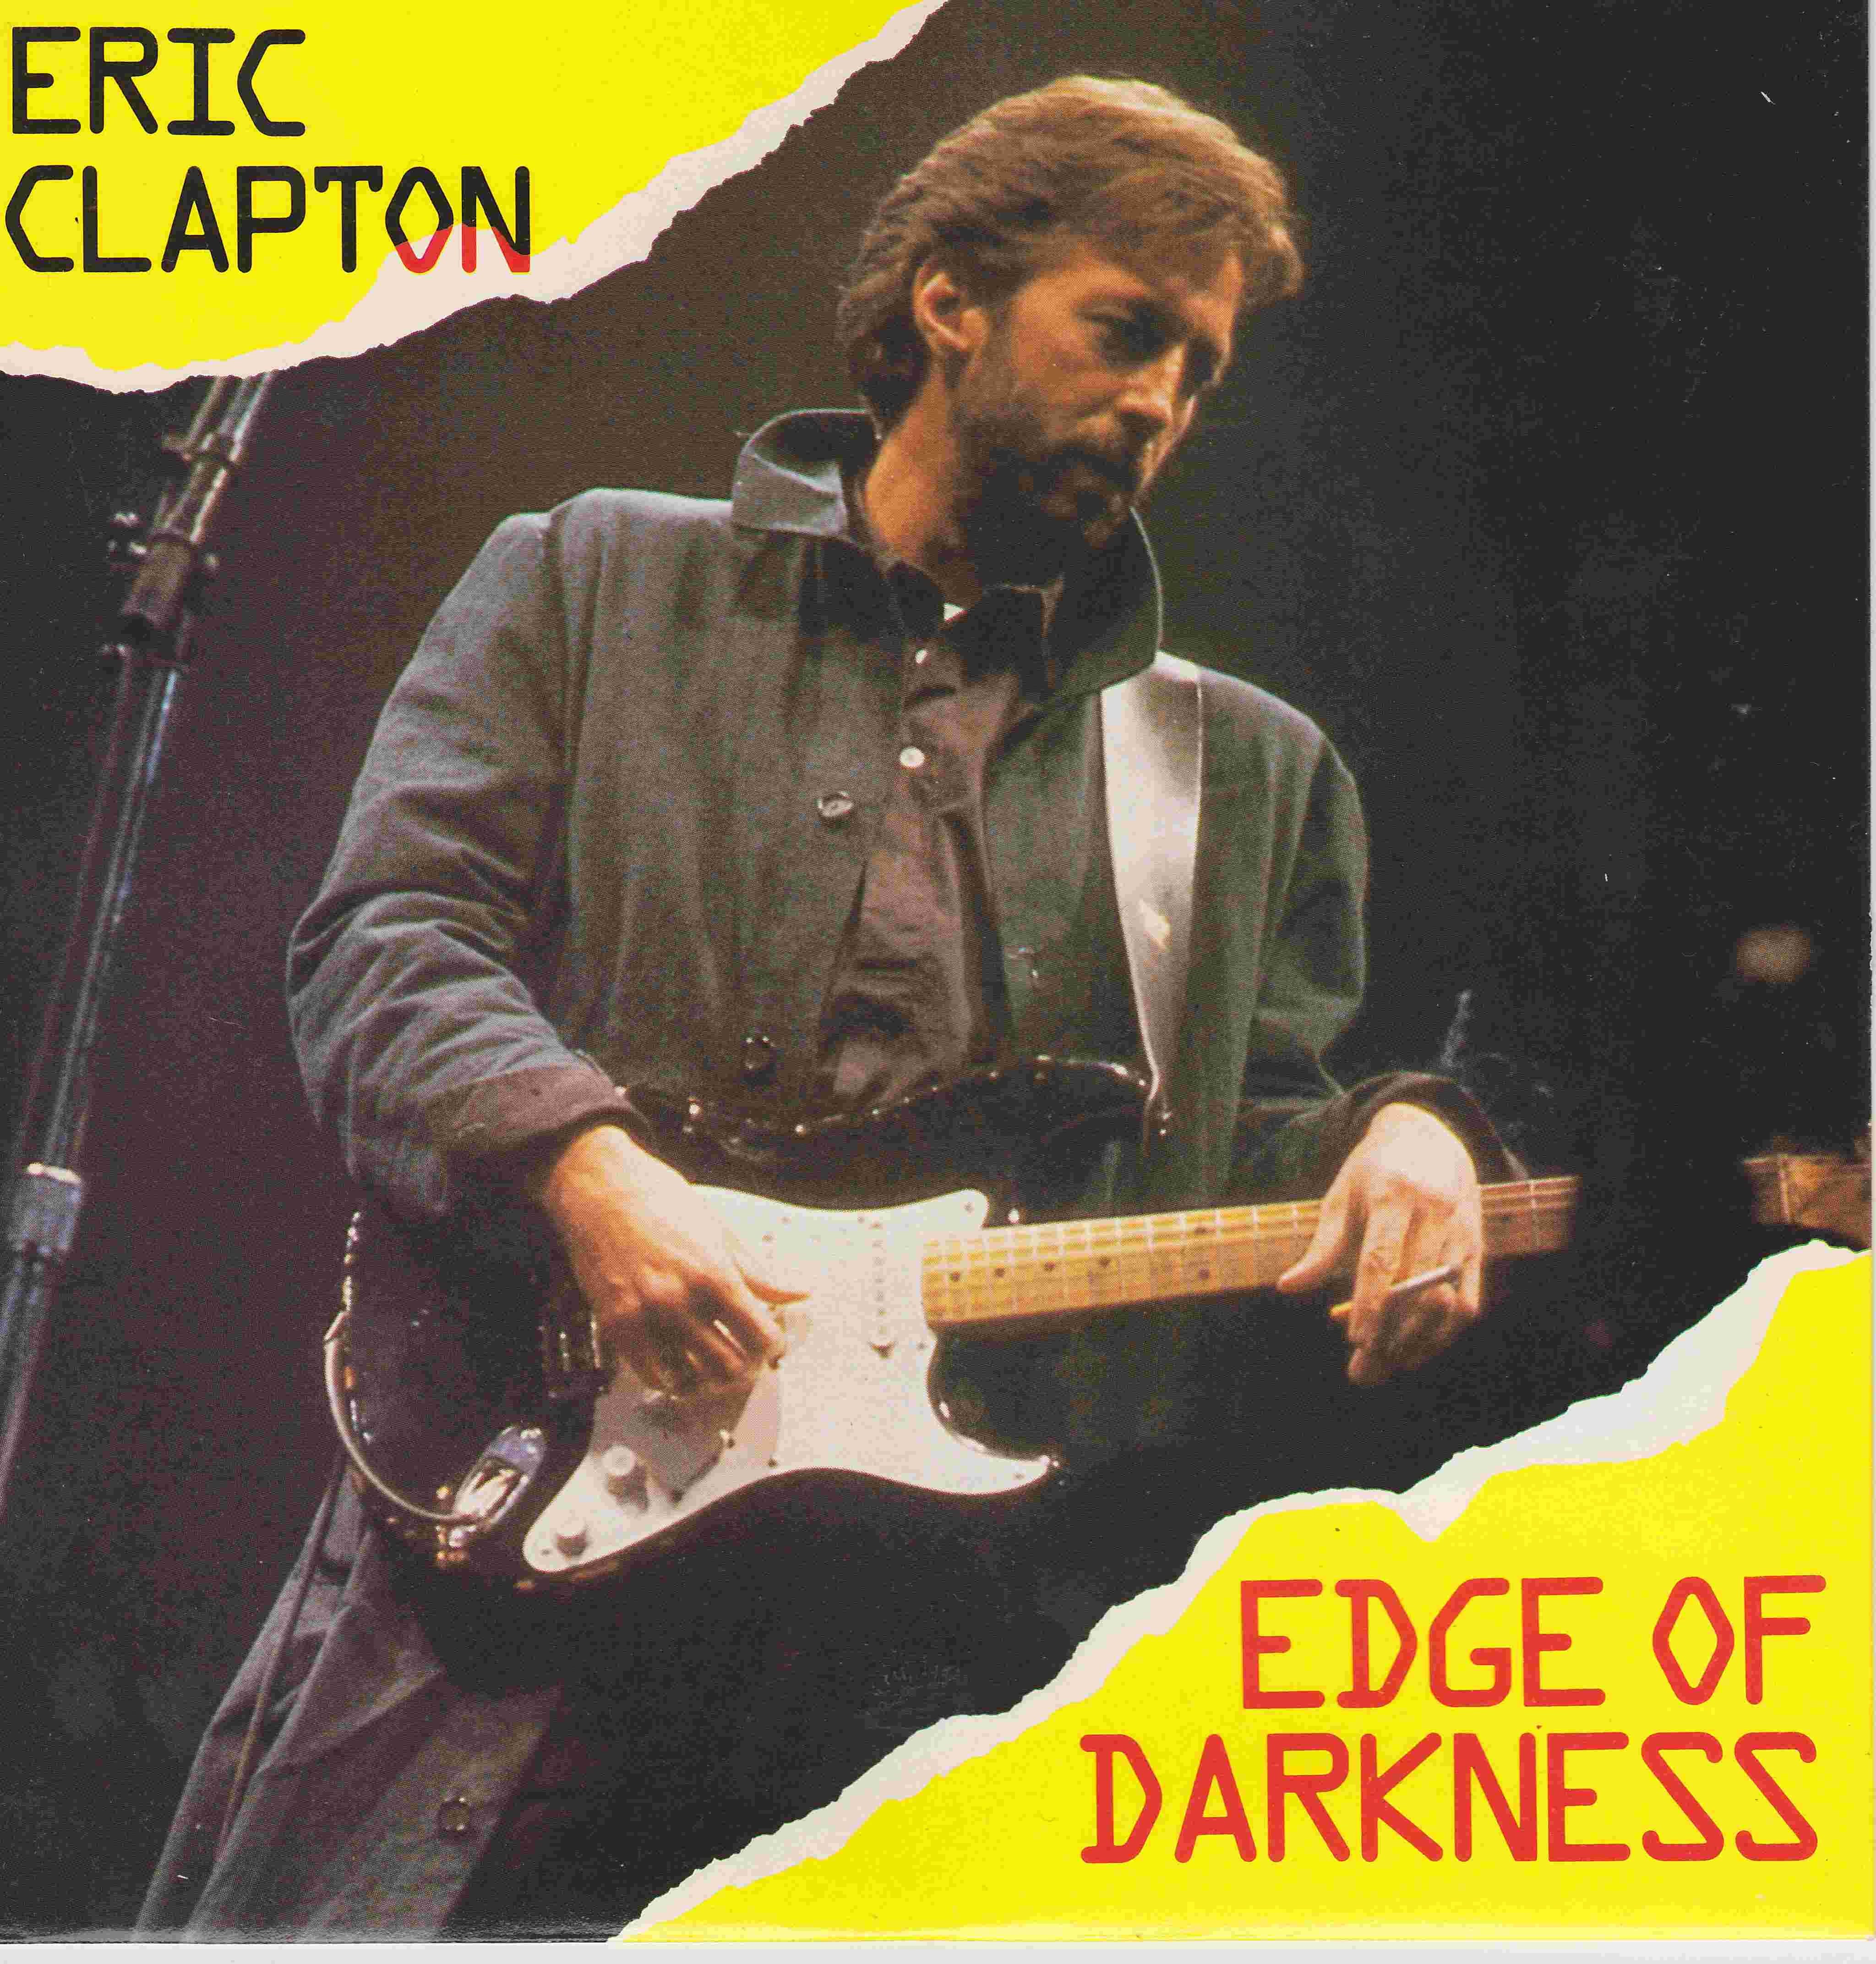 Picture of RESL 178 Edge of darkness by artist Eric Clapton / Michael Kamen from the BBC singles - Records and Tapes library